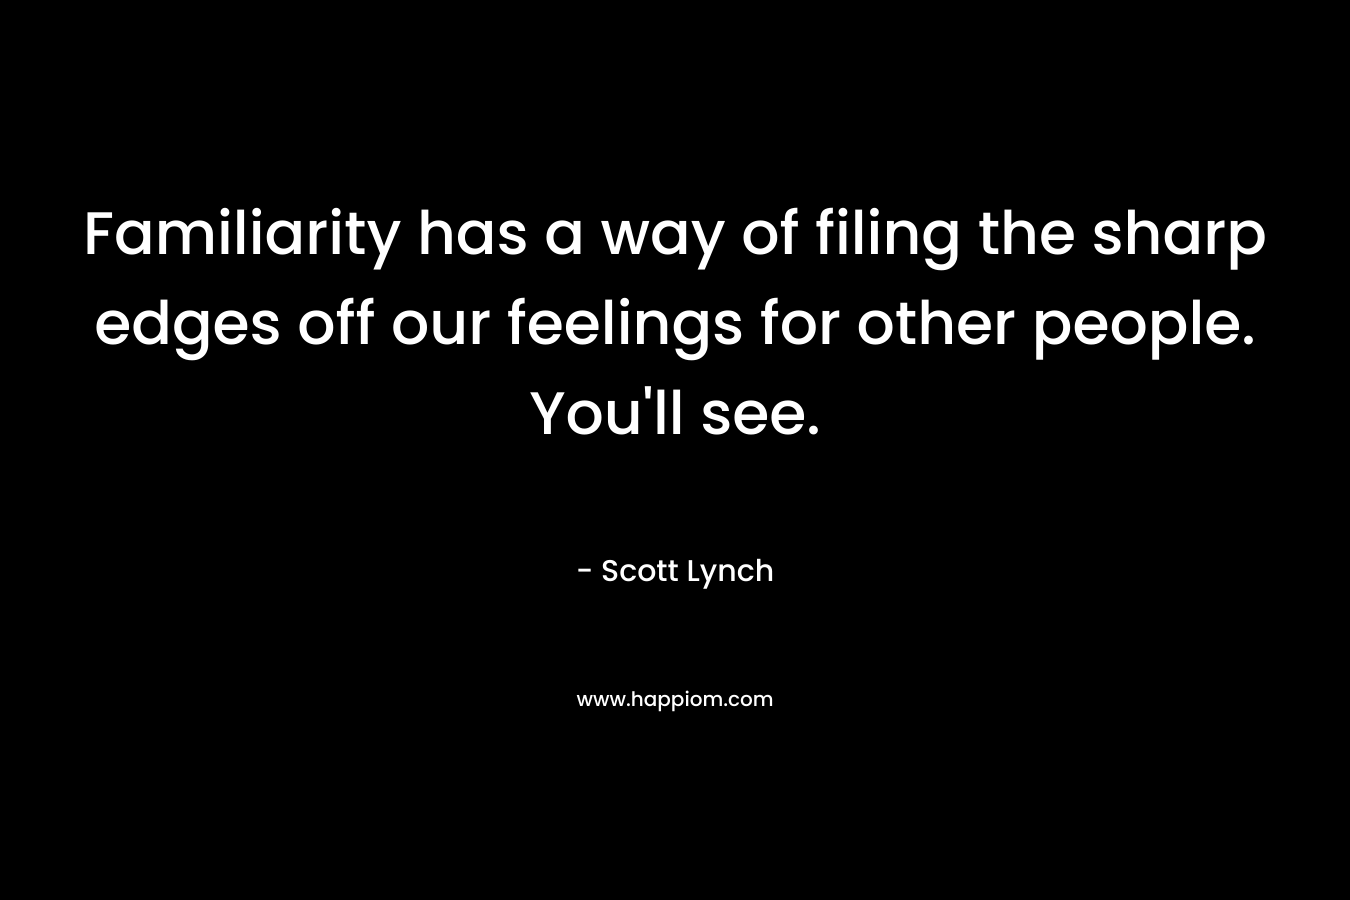 Familiarity has a way of filing the sharp edges off our feelings for other people. You’ll see. – Scott Lynch